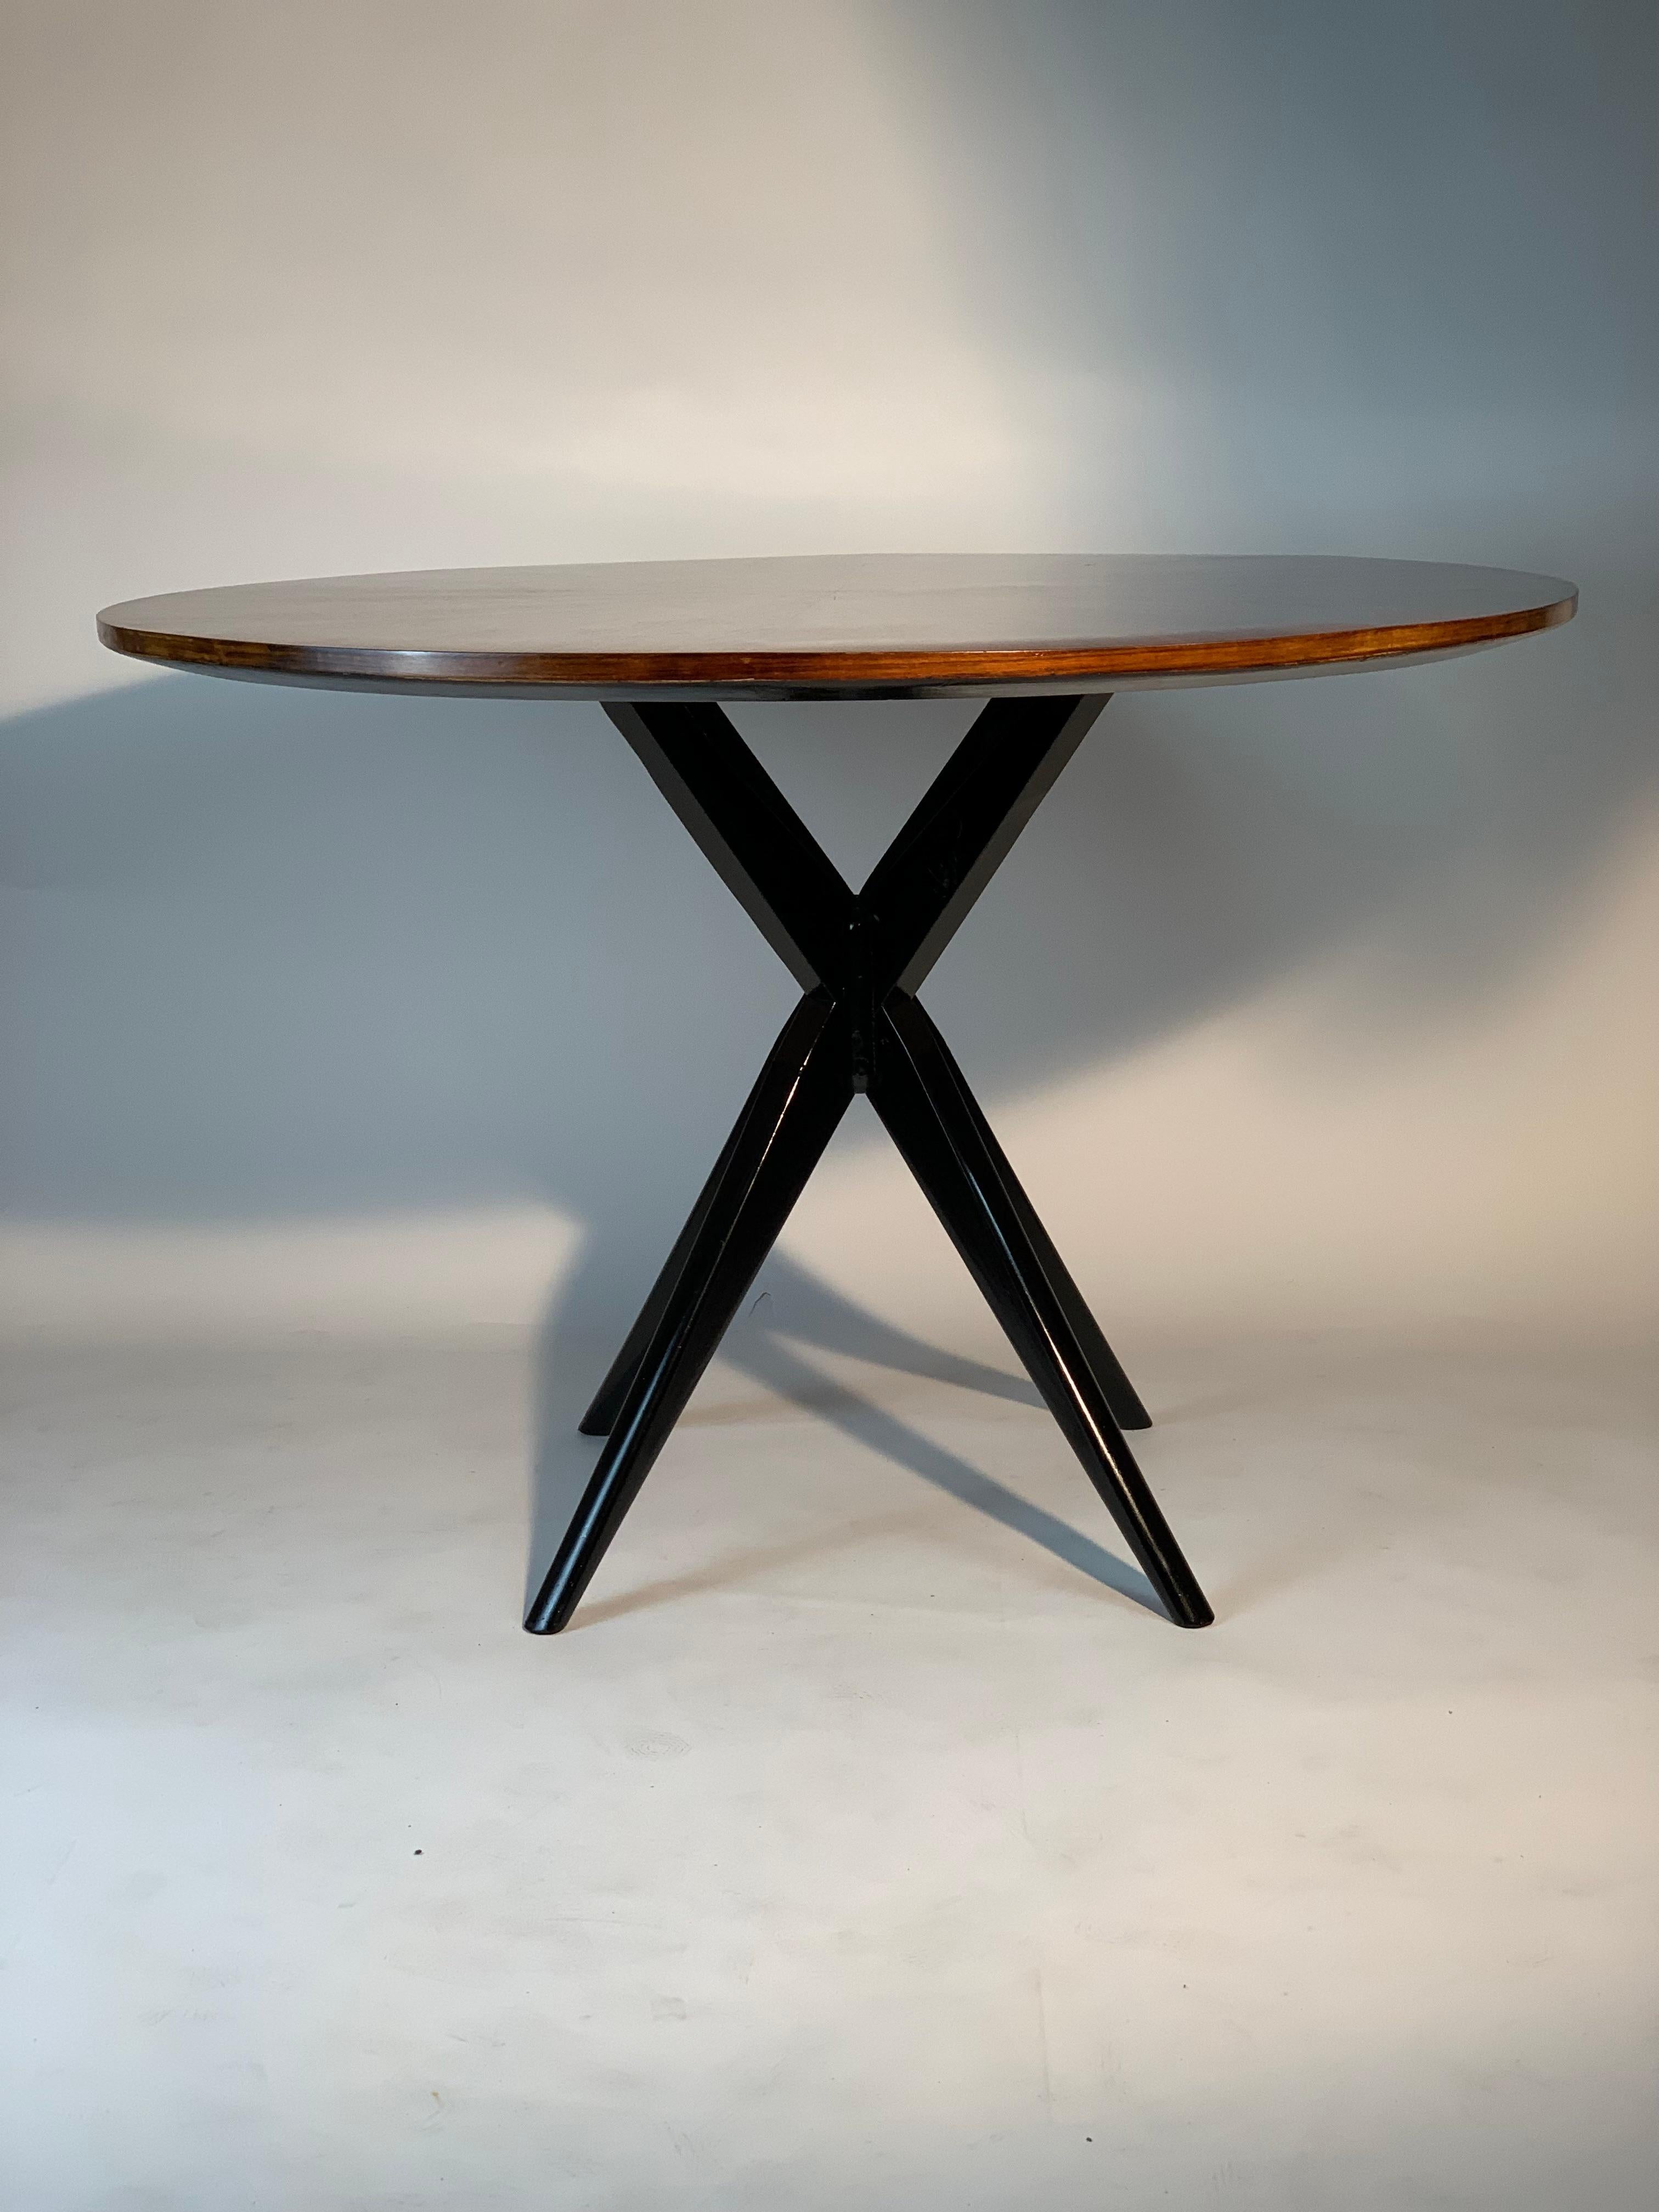 Italian Mid century round table made by the Permanent Furniture Exhibition Cantù - Milan the black lacquered solid wood base is a simple and stylized intersection that makes this round table modern and contemporary, it supports a top inlaid with